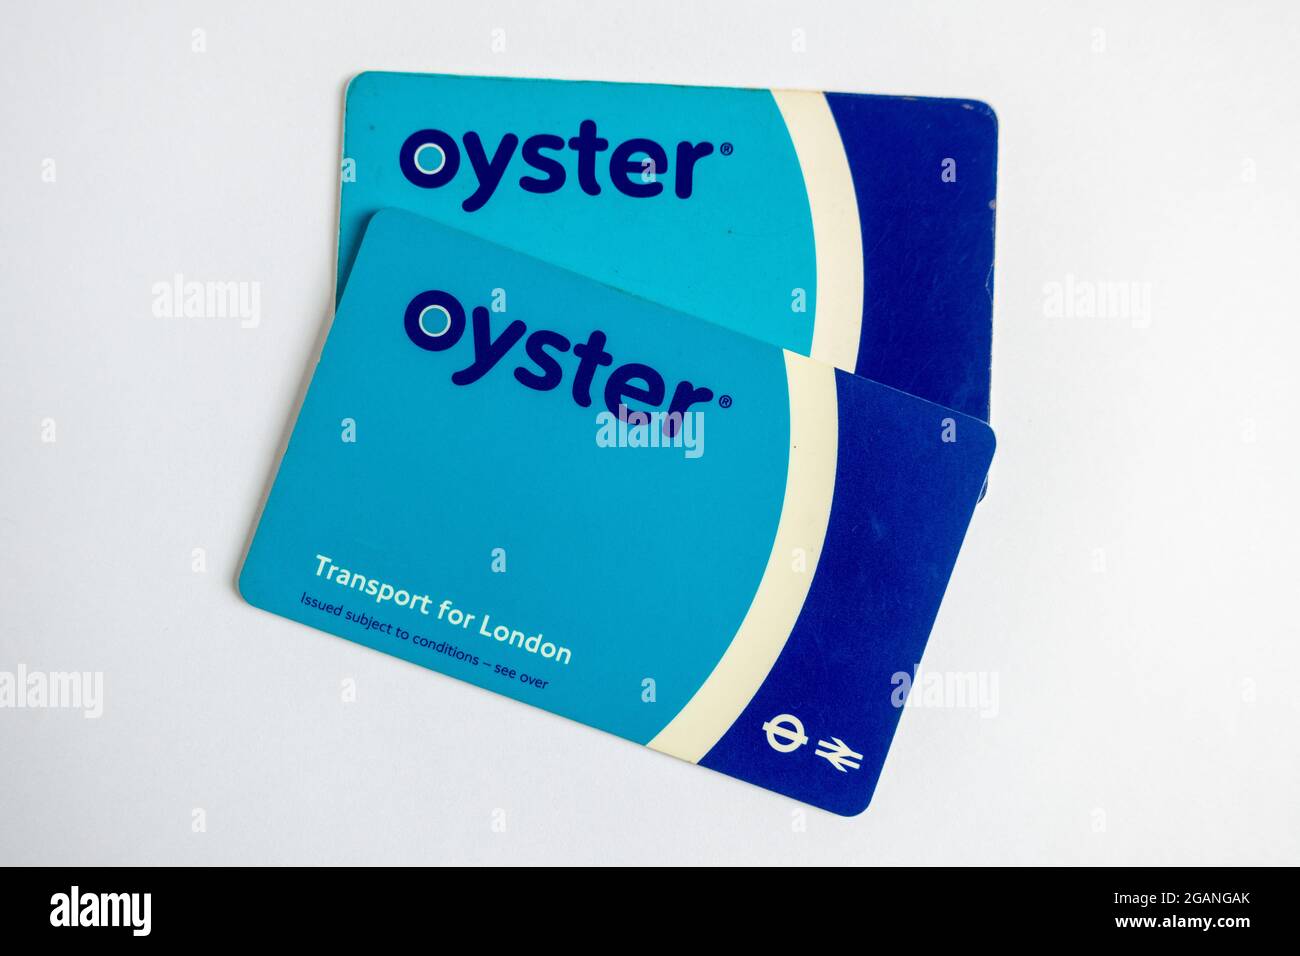 Oyster card the Transport for London travel card which can be used in LondonTubes, Trains, Bus, Tram and Boats. Stock Photo